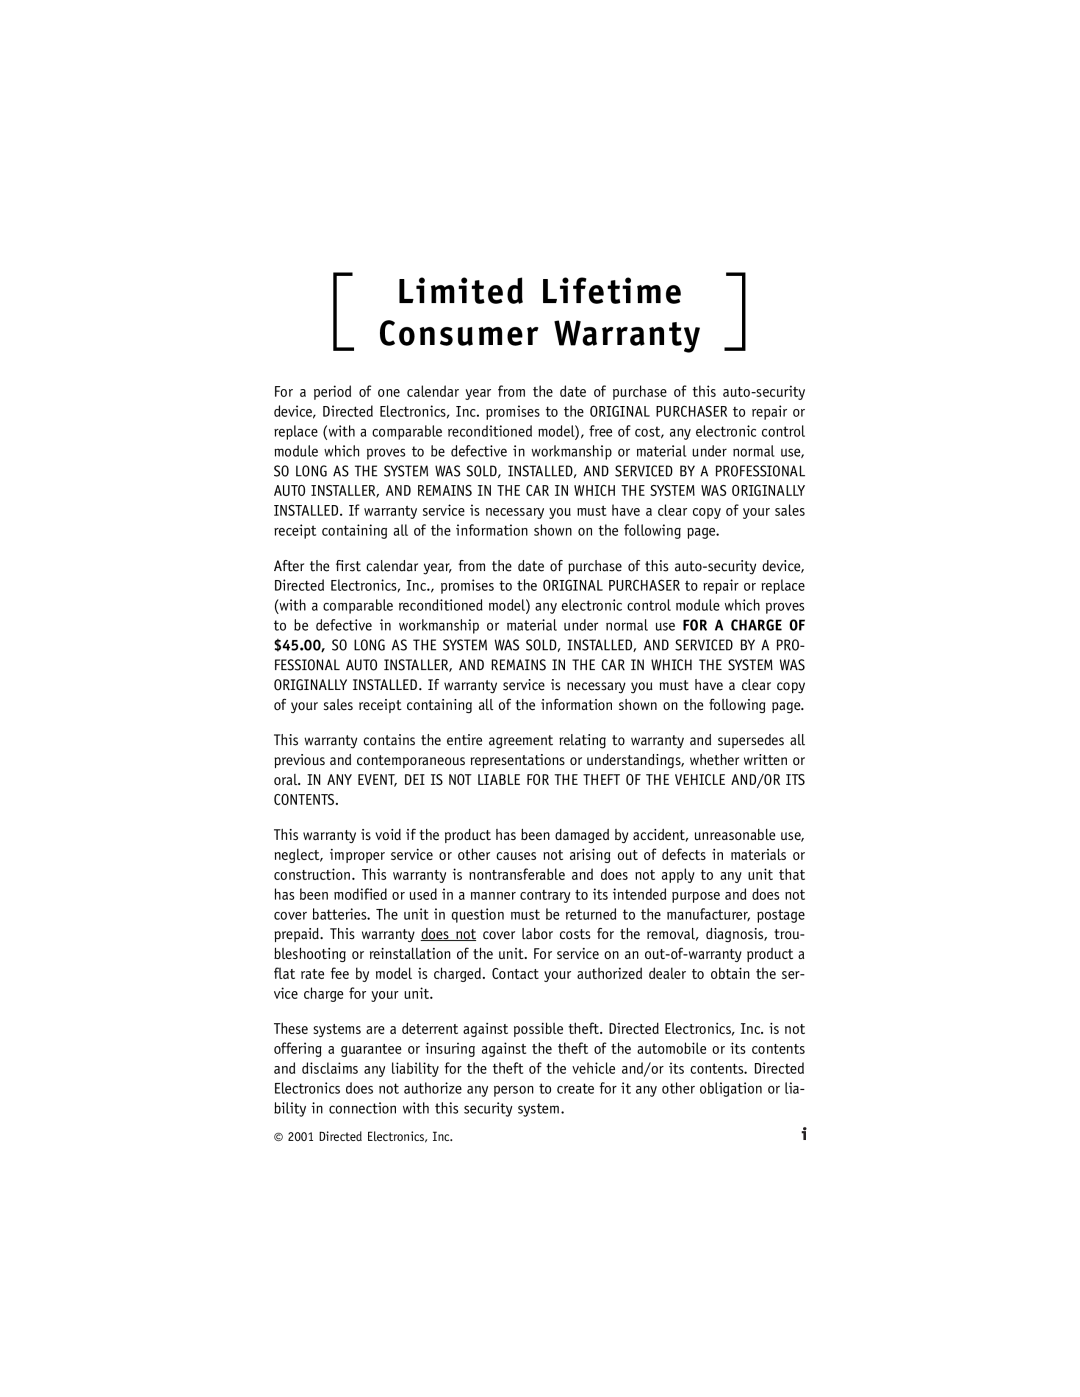 Directed Electronics Model 400 manual Limited Lifetime Consumer Warranty, Directed Electronics, Inc 